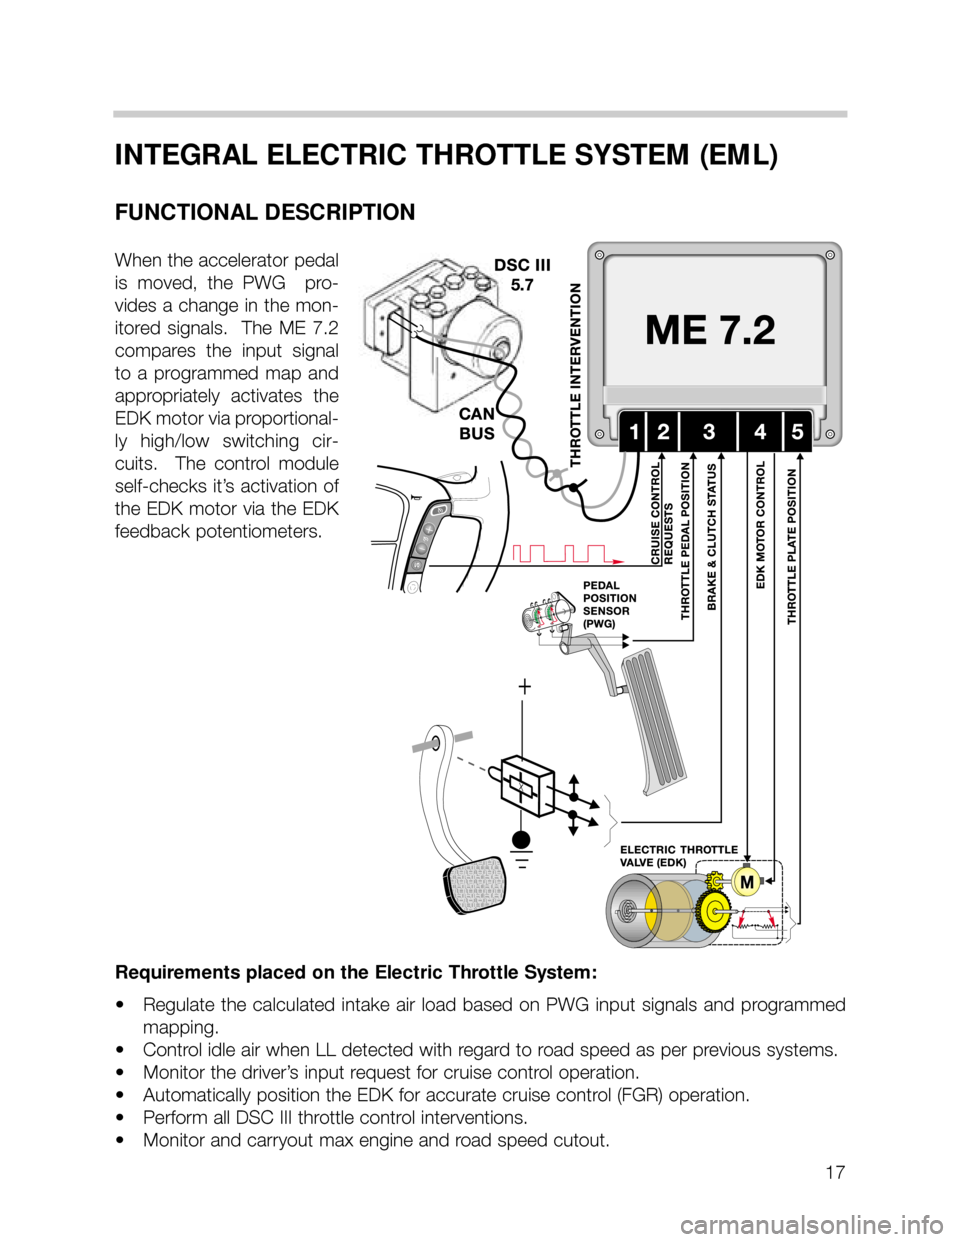 BMW 740i 2001 E38 M62TU Engine User Guide 17
INTEGRAL ELECTRIC THROTTLE SYSTEM (EML)
FUNCTIONAL DESCRIPTION
When the accelerator pedal
is  moved,  the  PWG    pro-
vides a change in the mon-
itored  signals.    The  ME  7.2
compares  the  inp